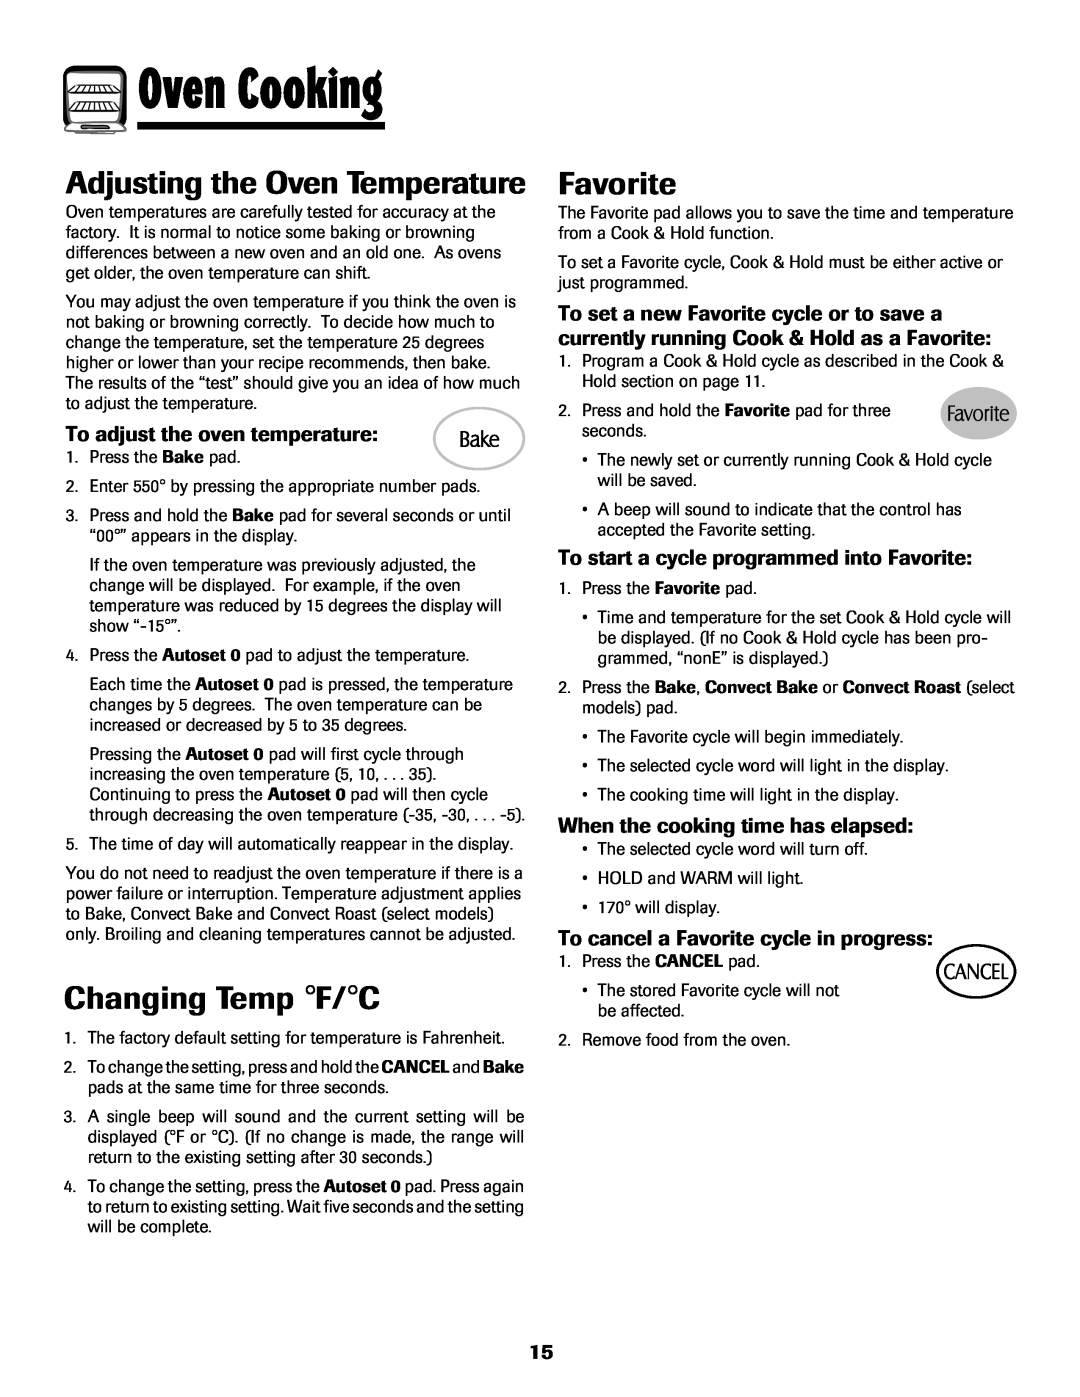 Maytag MGS5875BDW Adjusting the Oven Temperature, Changing Temp F/C, Favorite, To adjust the oven temperature 